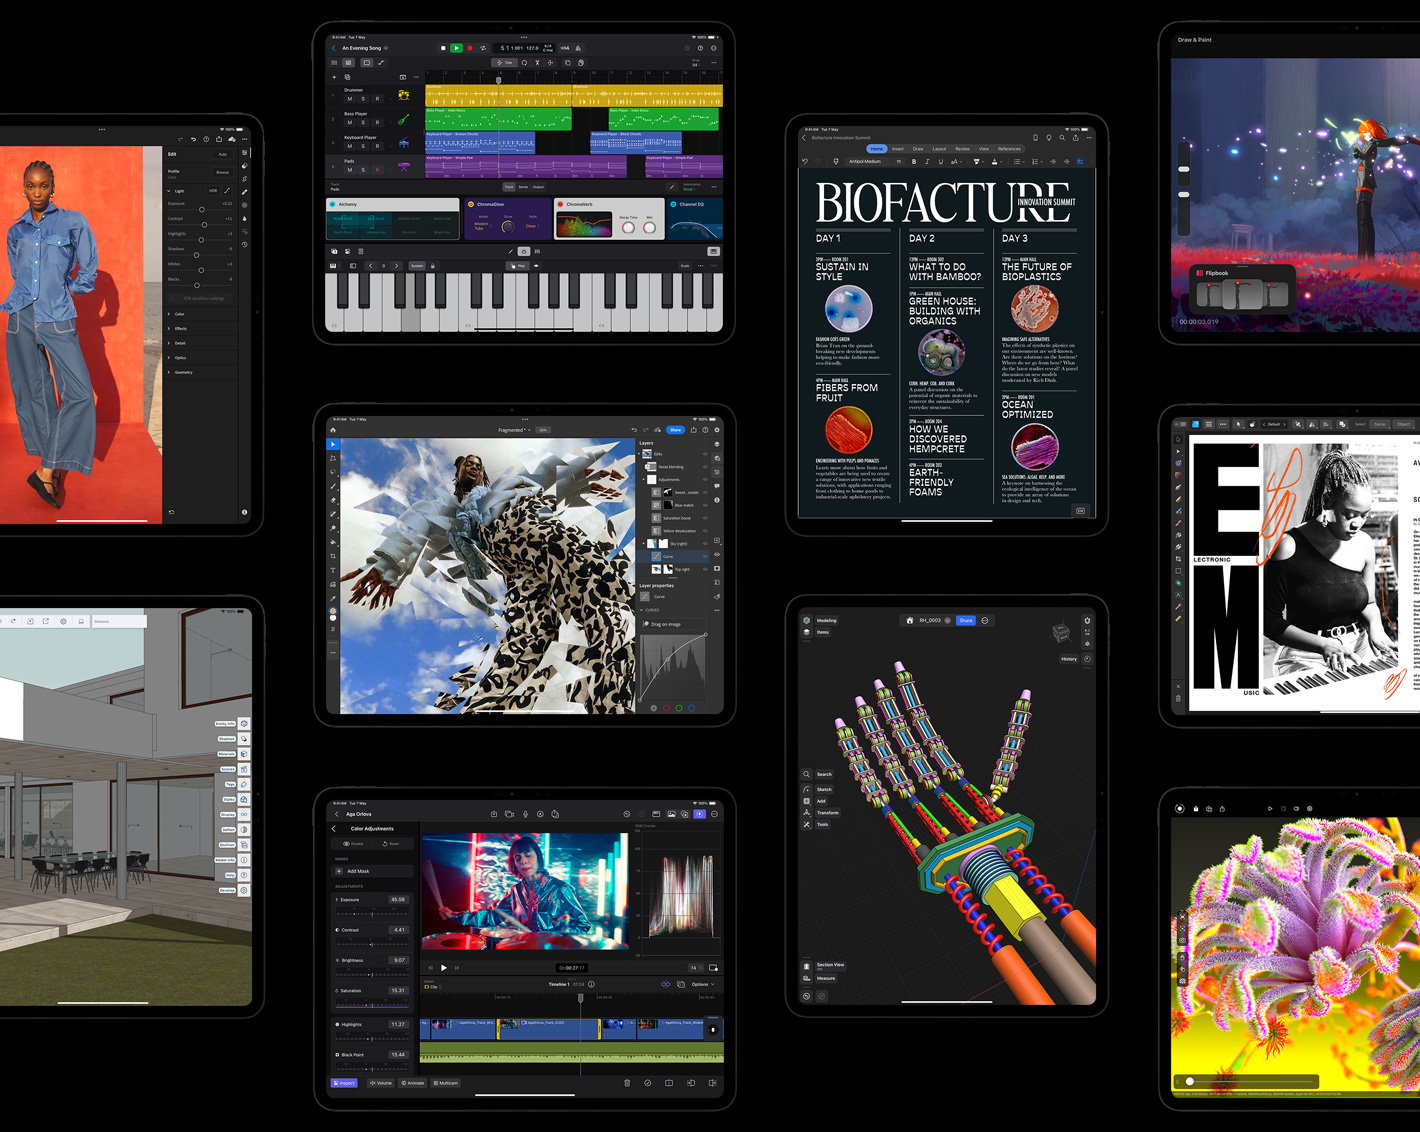 Ten iPad Pro displays showcasing different apps like - Adobe Lightroom for iPad, Trimble SketchUp, Logic Pro for iPad, Adobe Lightroom for iPad, Final Cut Pro for iPad, Microsoft Word, Shapr3D, Procreate Dreams, Affinity Designer 2 for iPad, Octane X